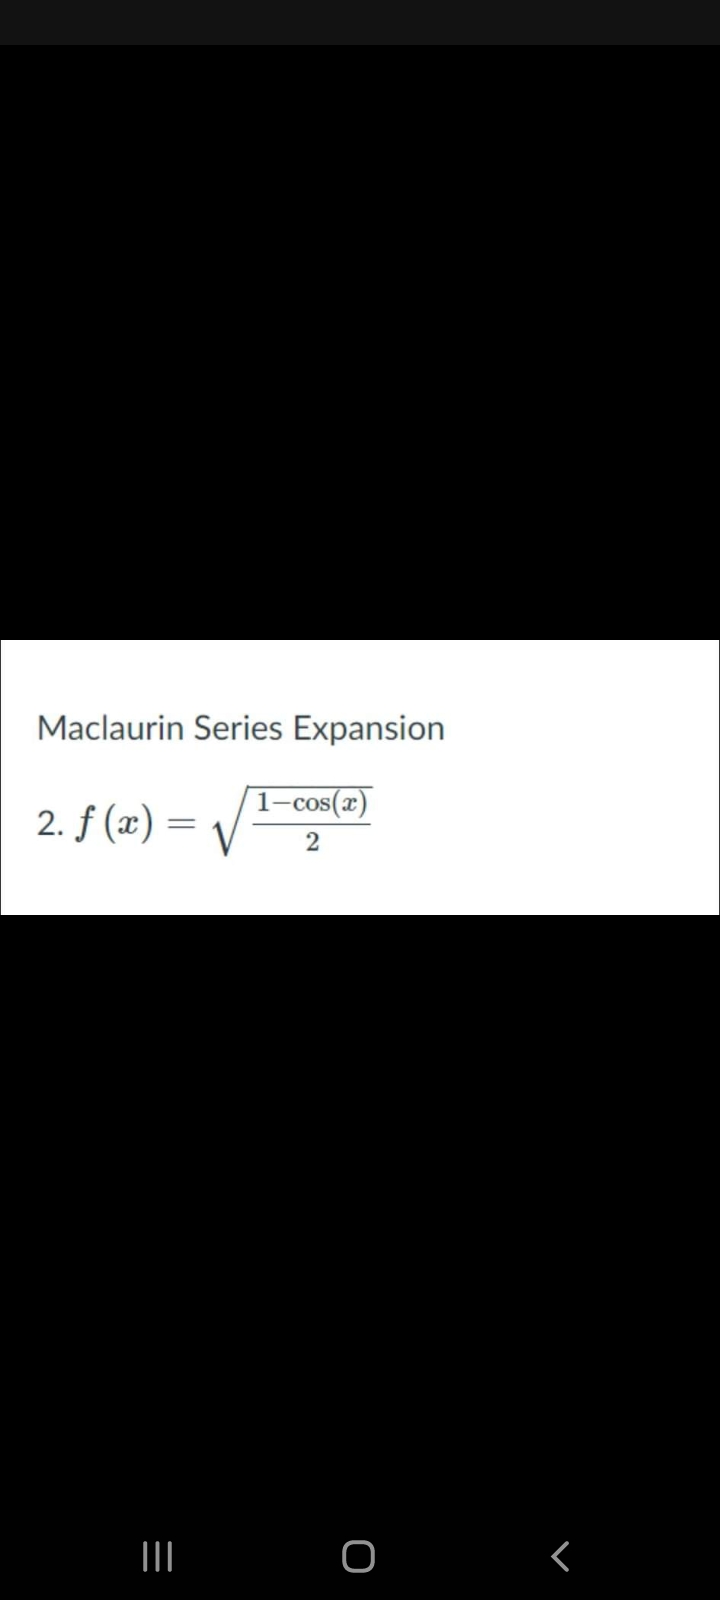 Maclaurin Series Expansion
1-cos(x)
2. f (x) =
2
|I O
